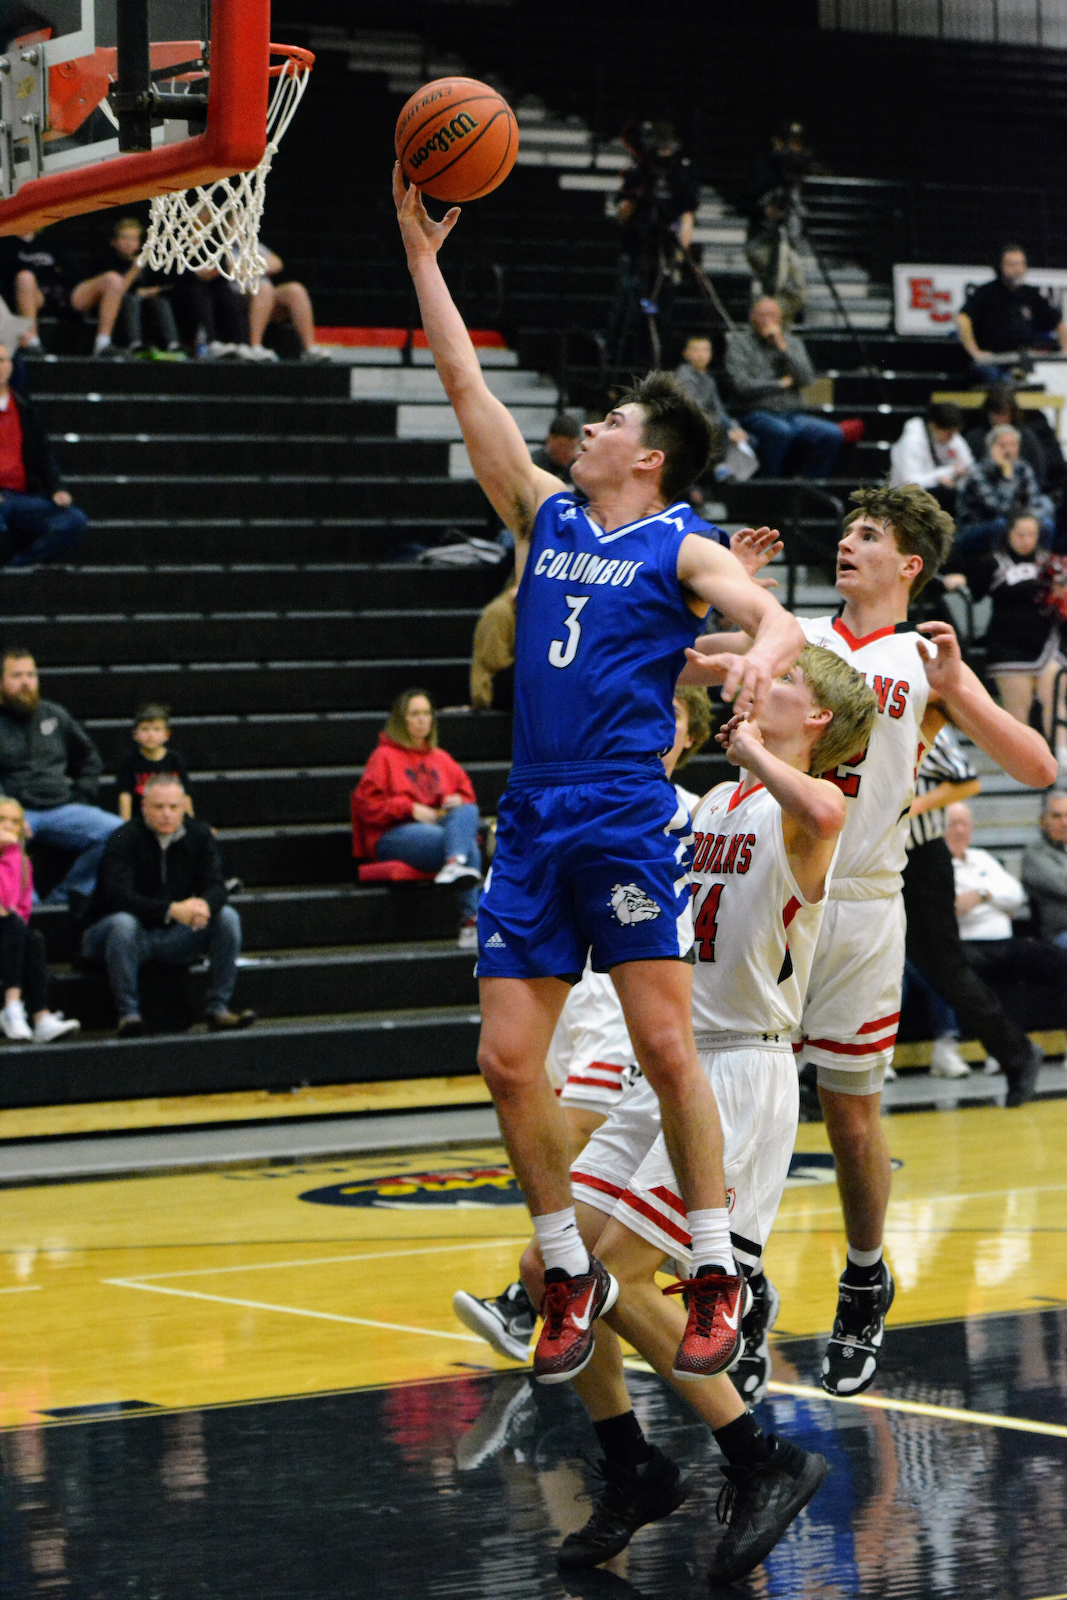 2022-23 Boys Basketball at East Central gallery cover photo